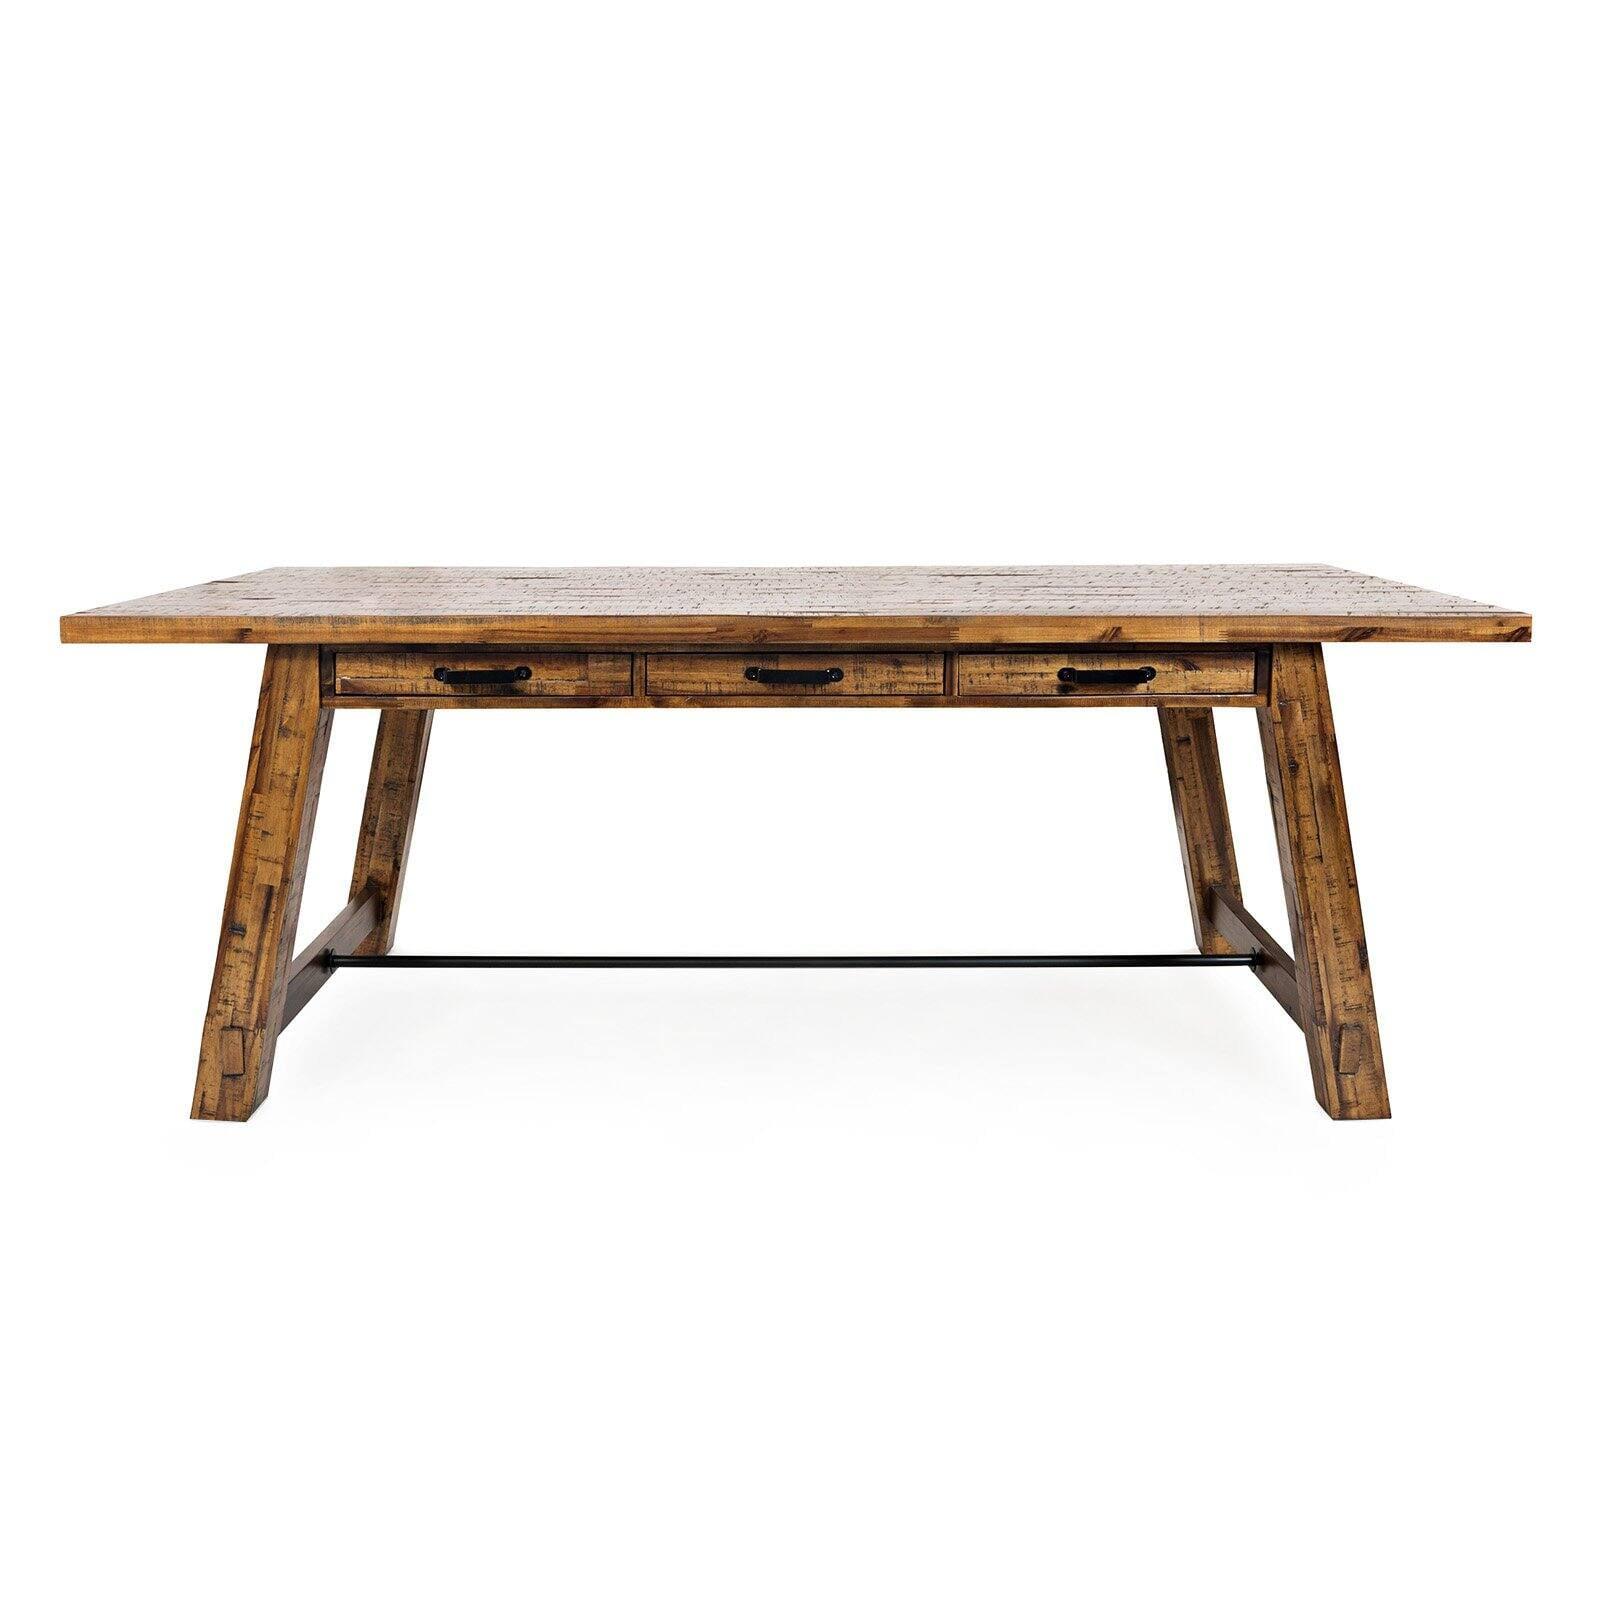 Cannon Valley Rustic 82" Brown Trestle Dining Table with Storage